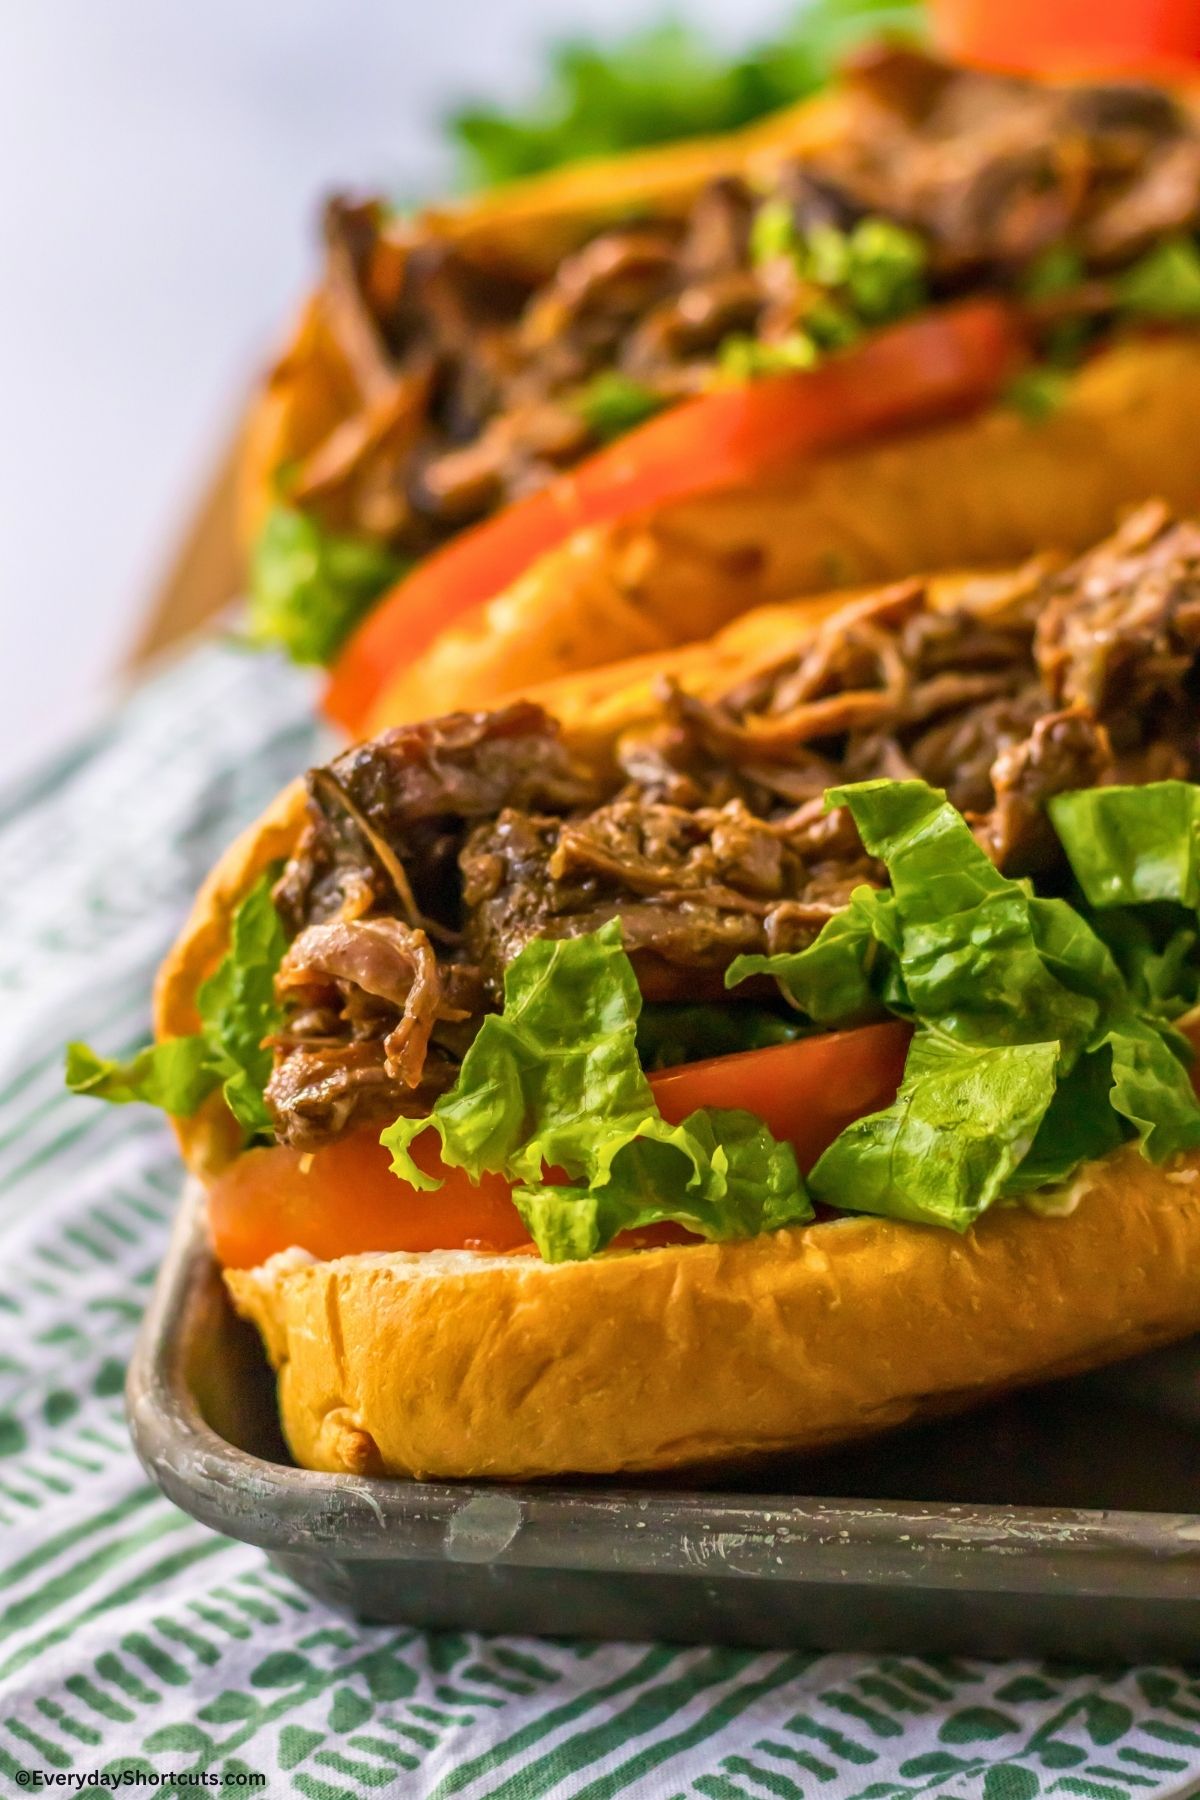 shredded roast beef and toppings on a sub bun